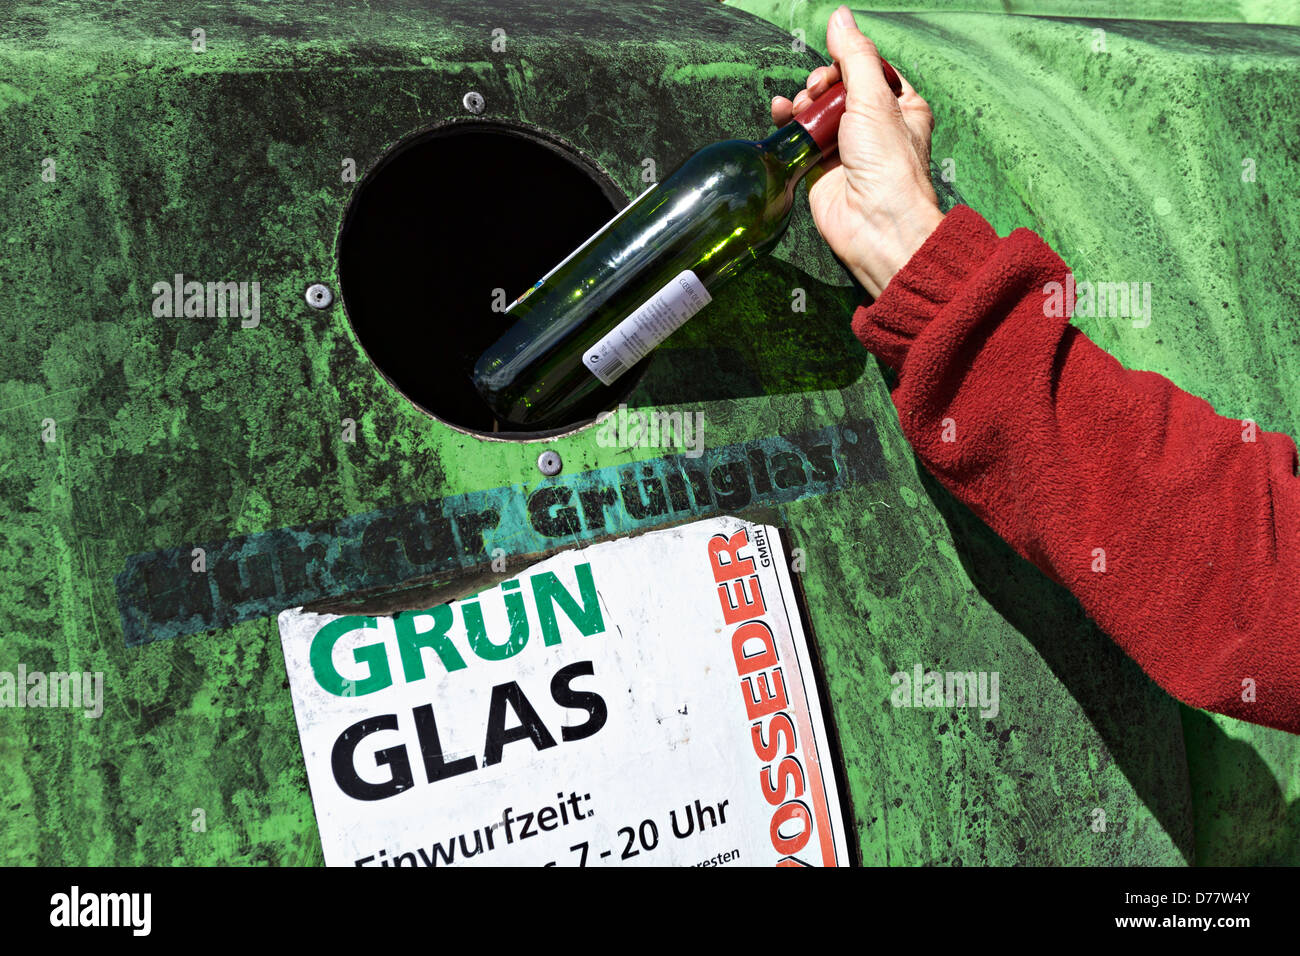 Woman placing bottle into a green glass recycling container, Prien Upper Bavaria Germany Stock Photo